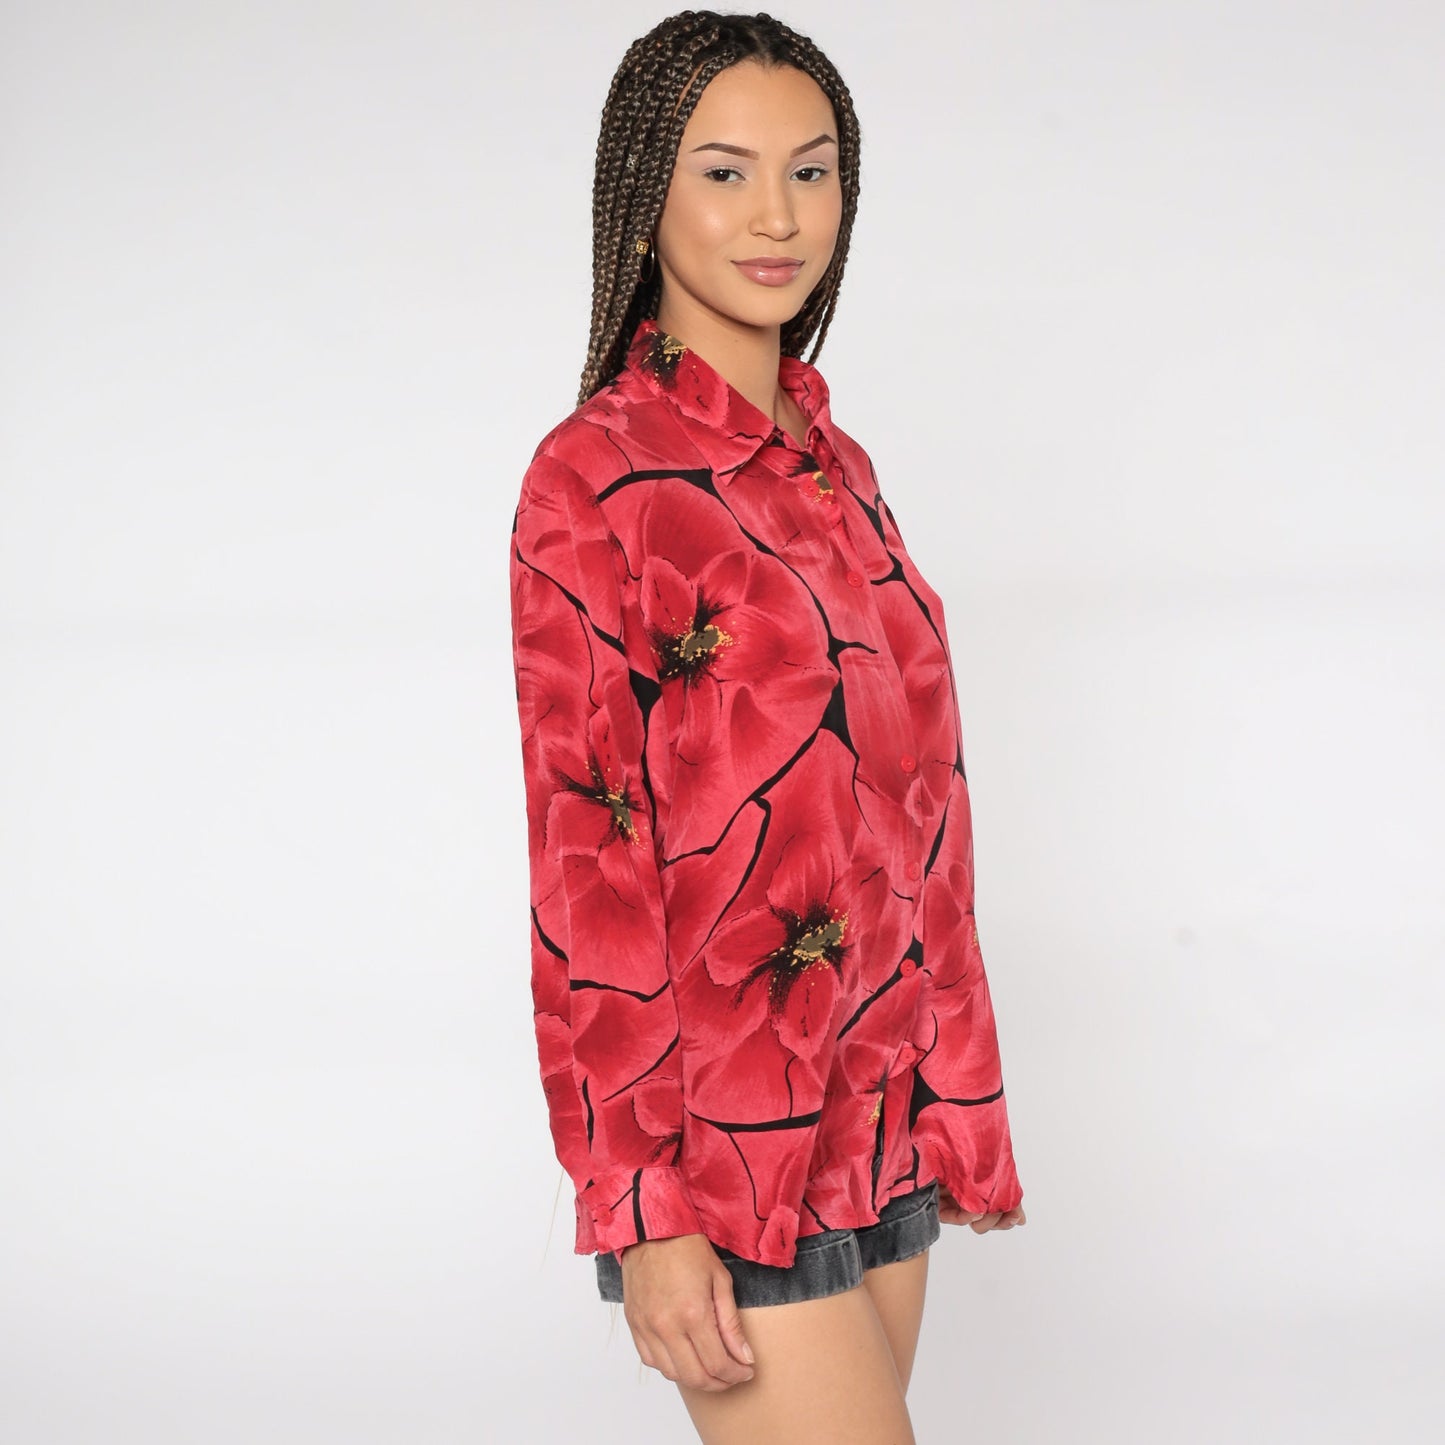 Silk Floral Shirt 90s Red Floral Button Up Shirt 80s Long Sleeve Top 1990s Vintage Shirt Large